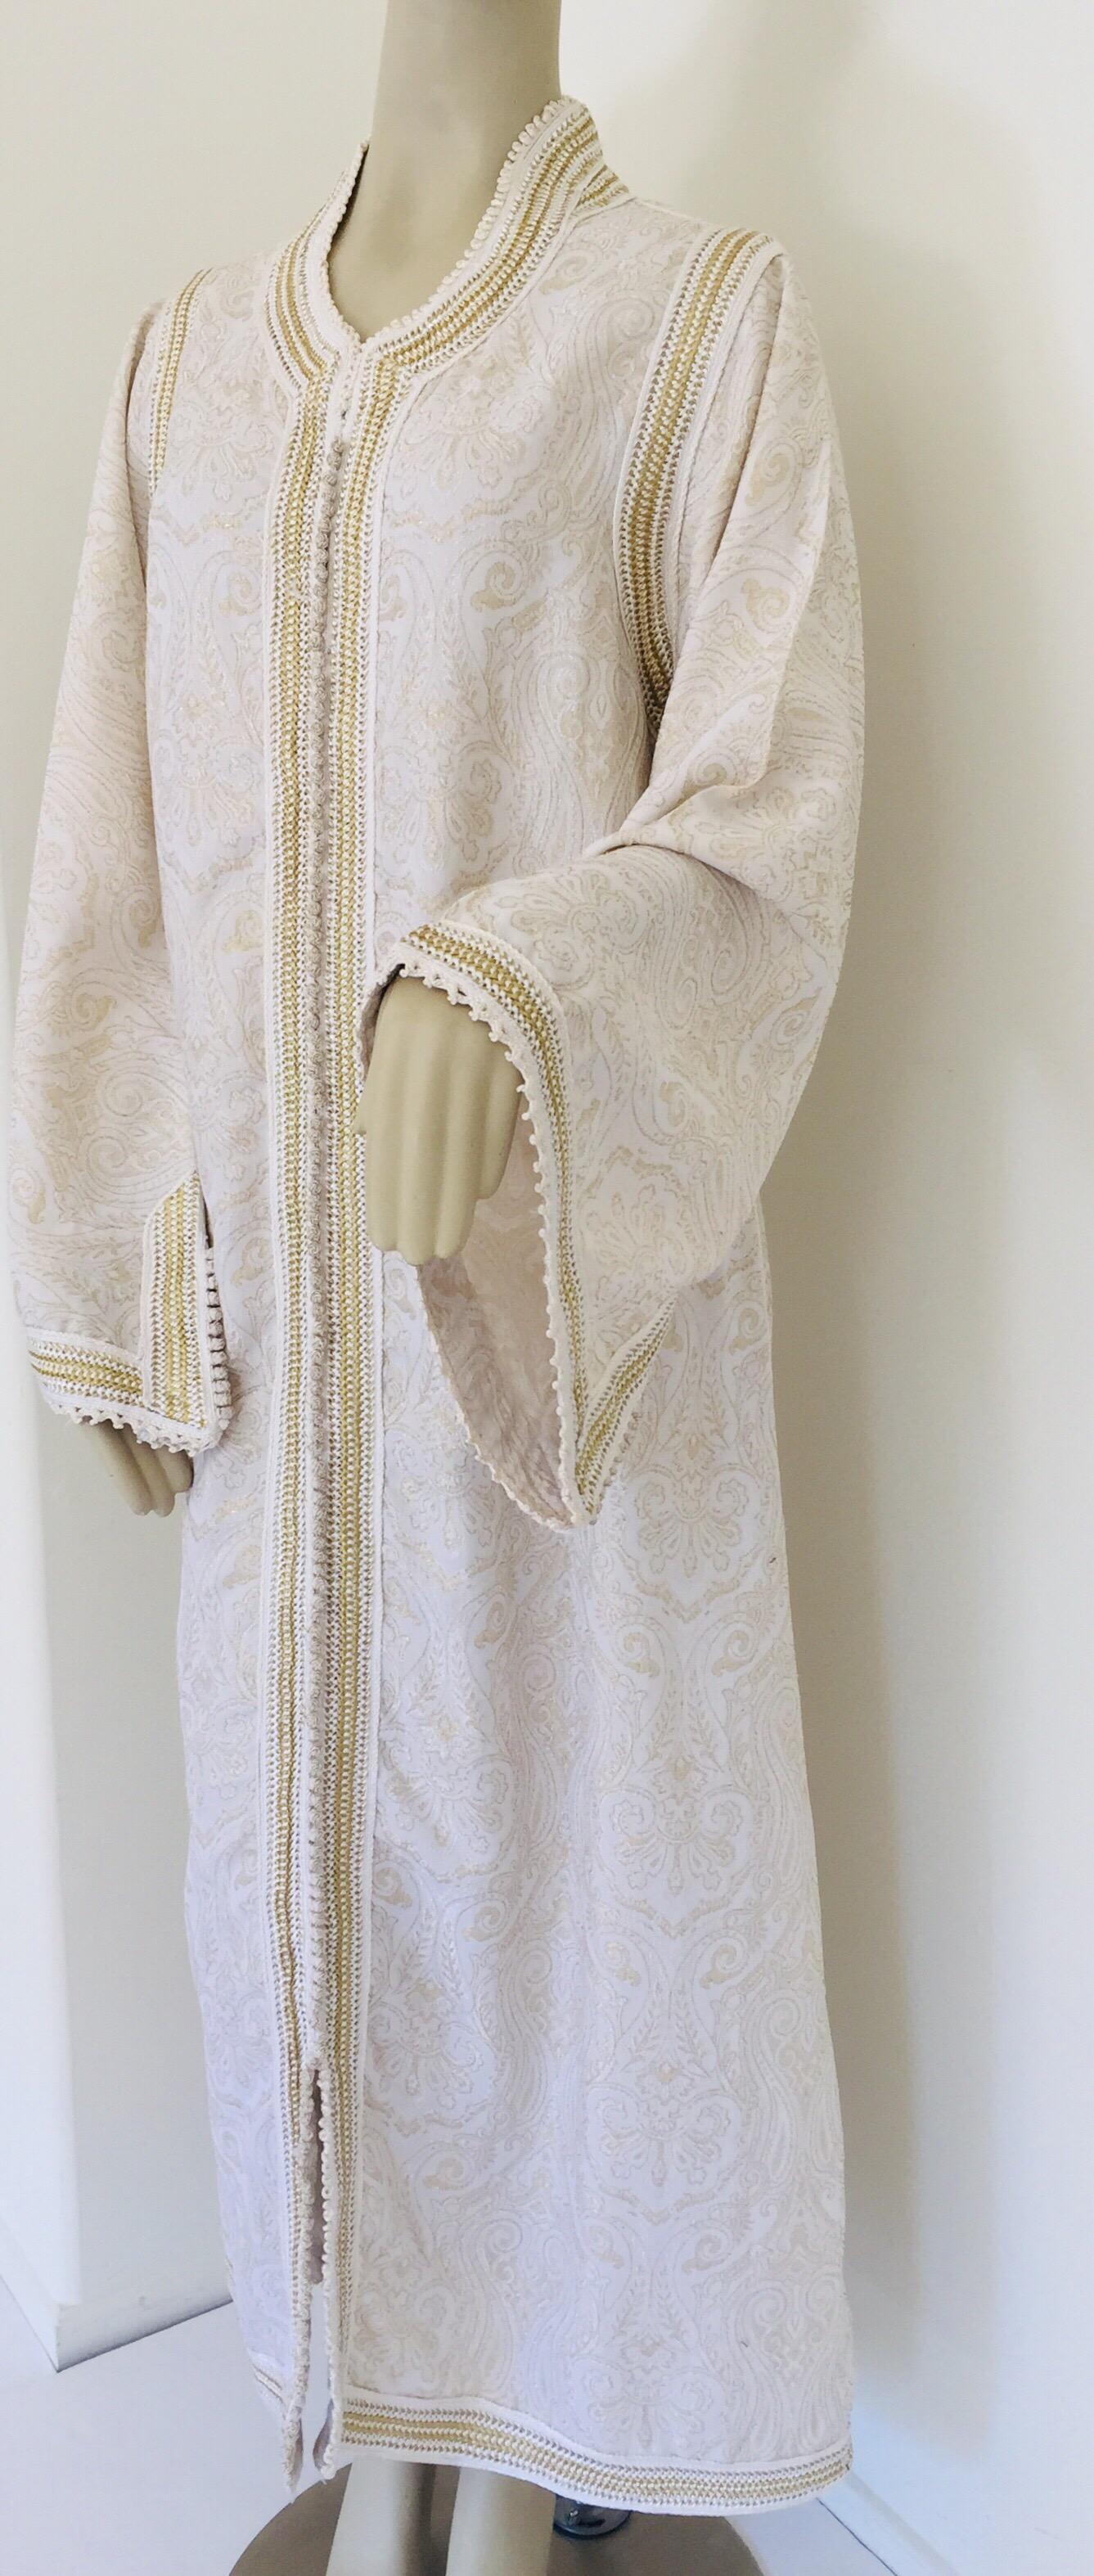 Moroccan White Kaftan Maxi Dress Caftan Size Large In Good Condition For Sale In North Hollywood, CA